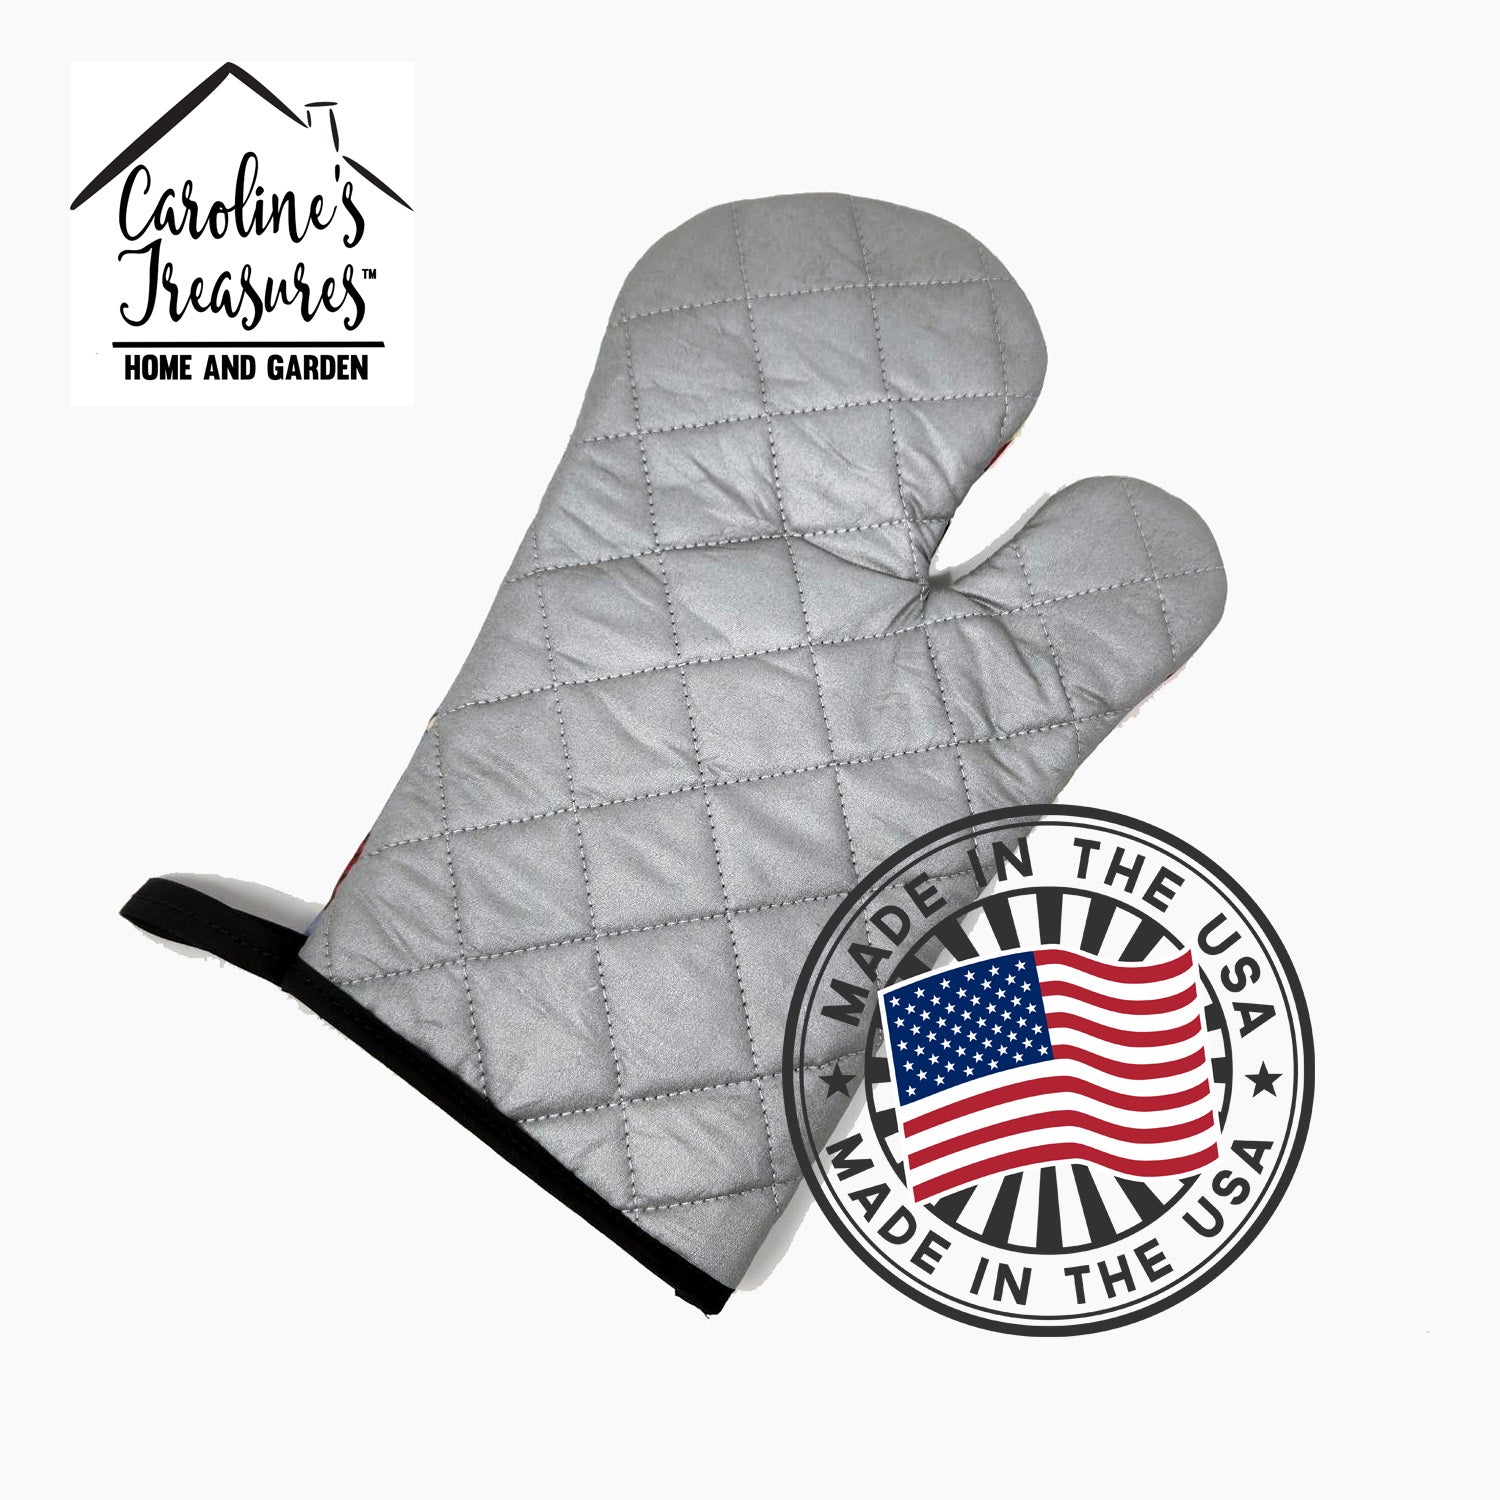 American Flag and Beagle Oven Mitt BB2169OVMT